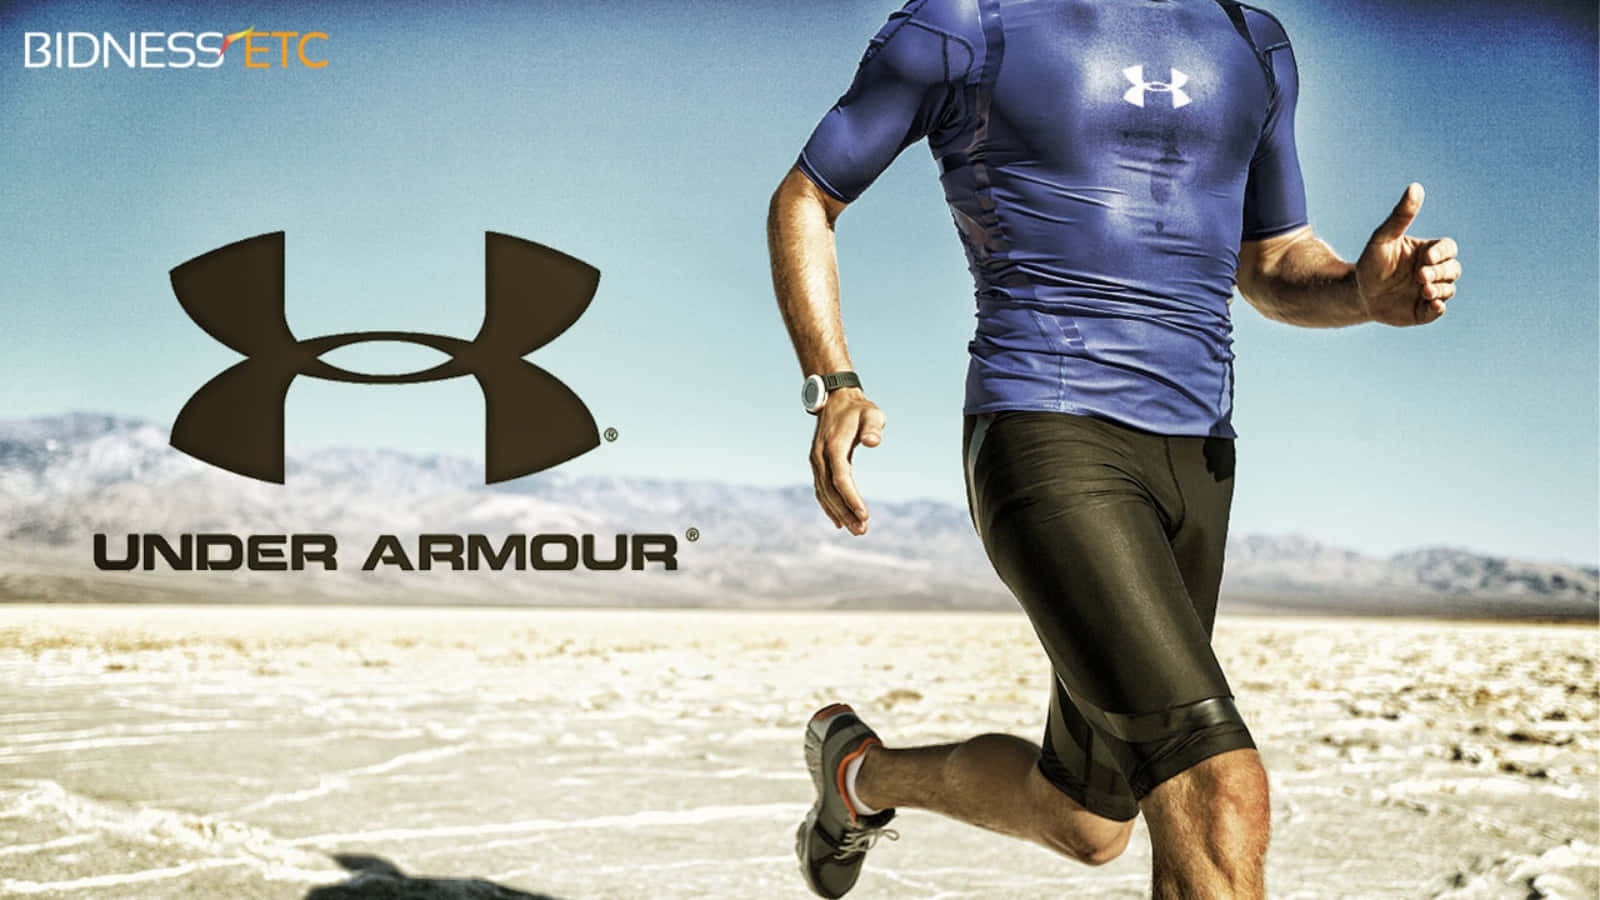 Stay competitive in life and sports with Under Armour!